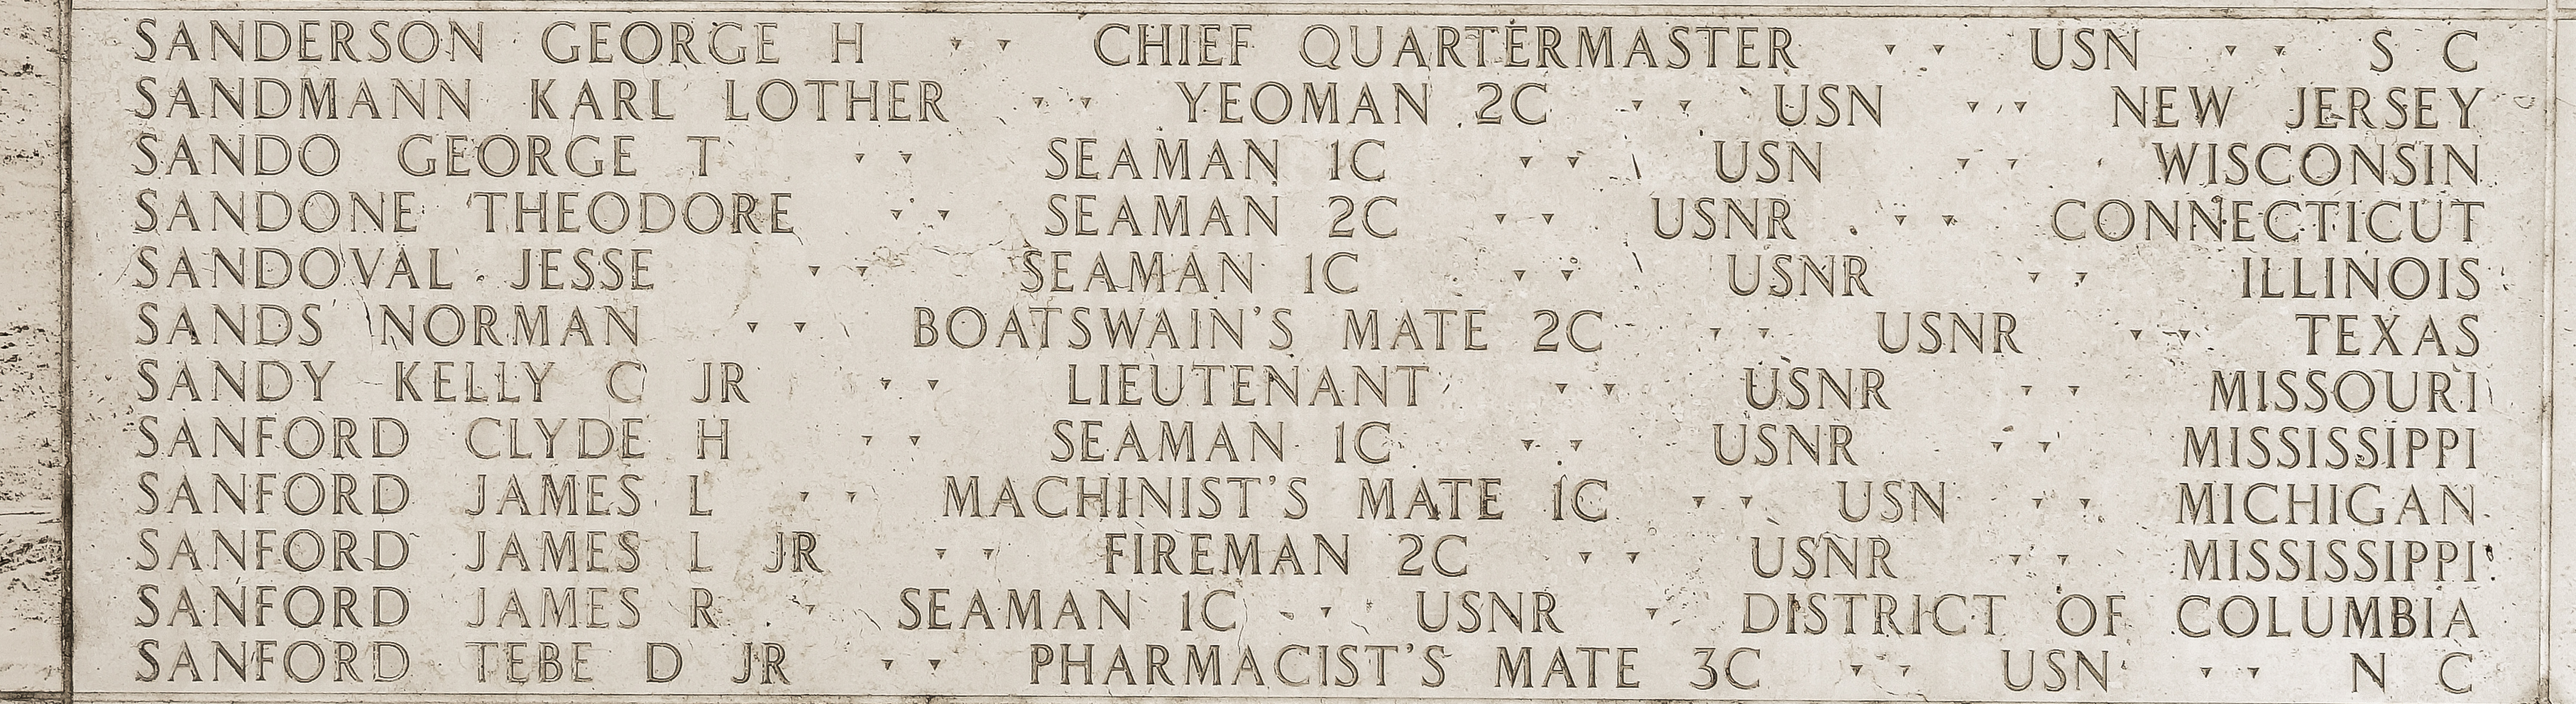 Norman  Sands, Boatswain's Mate Second Class